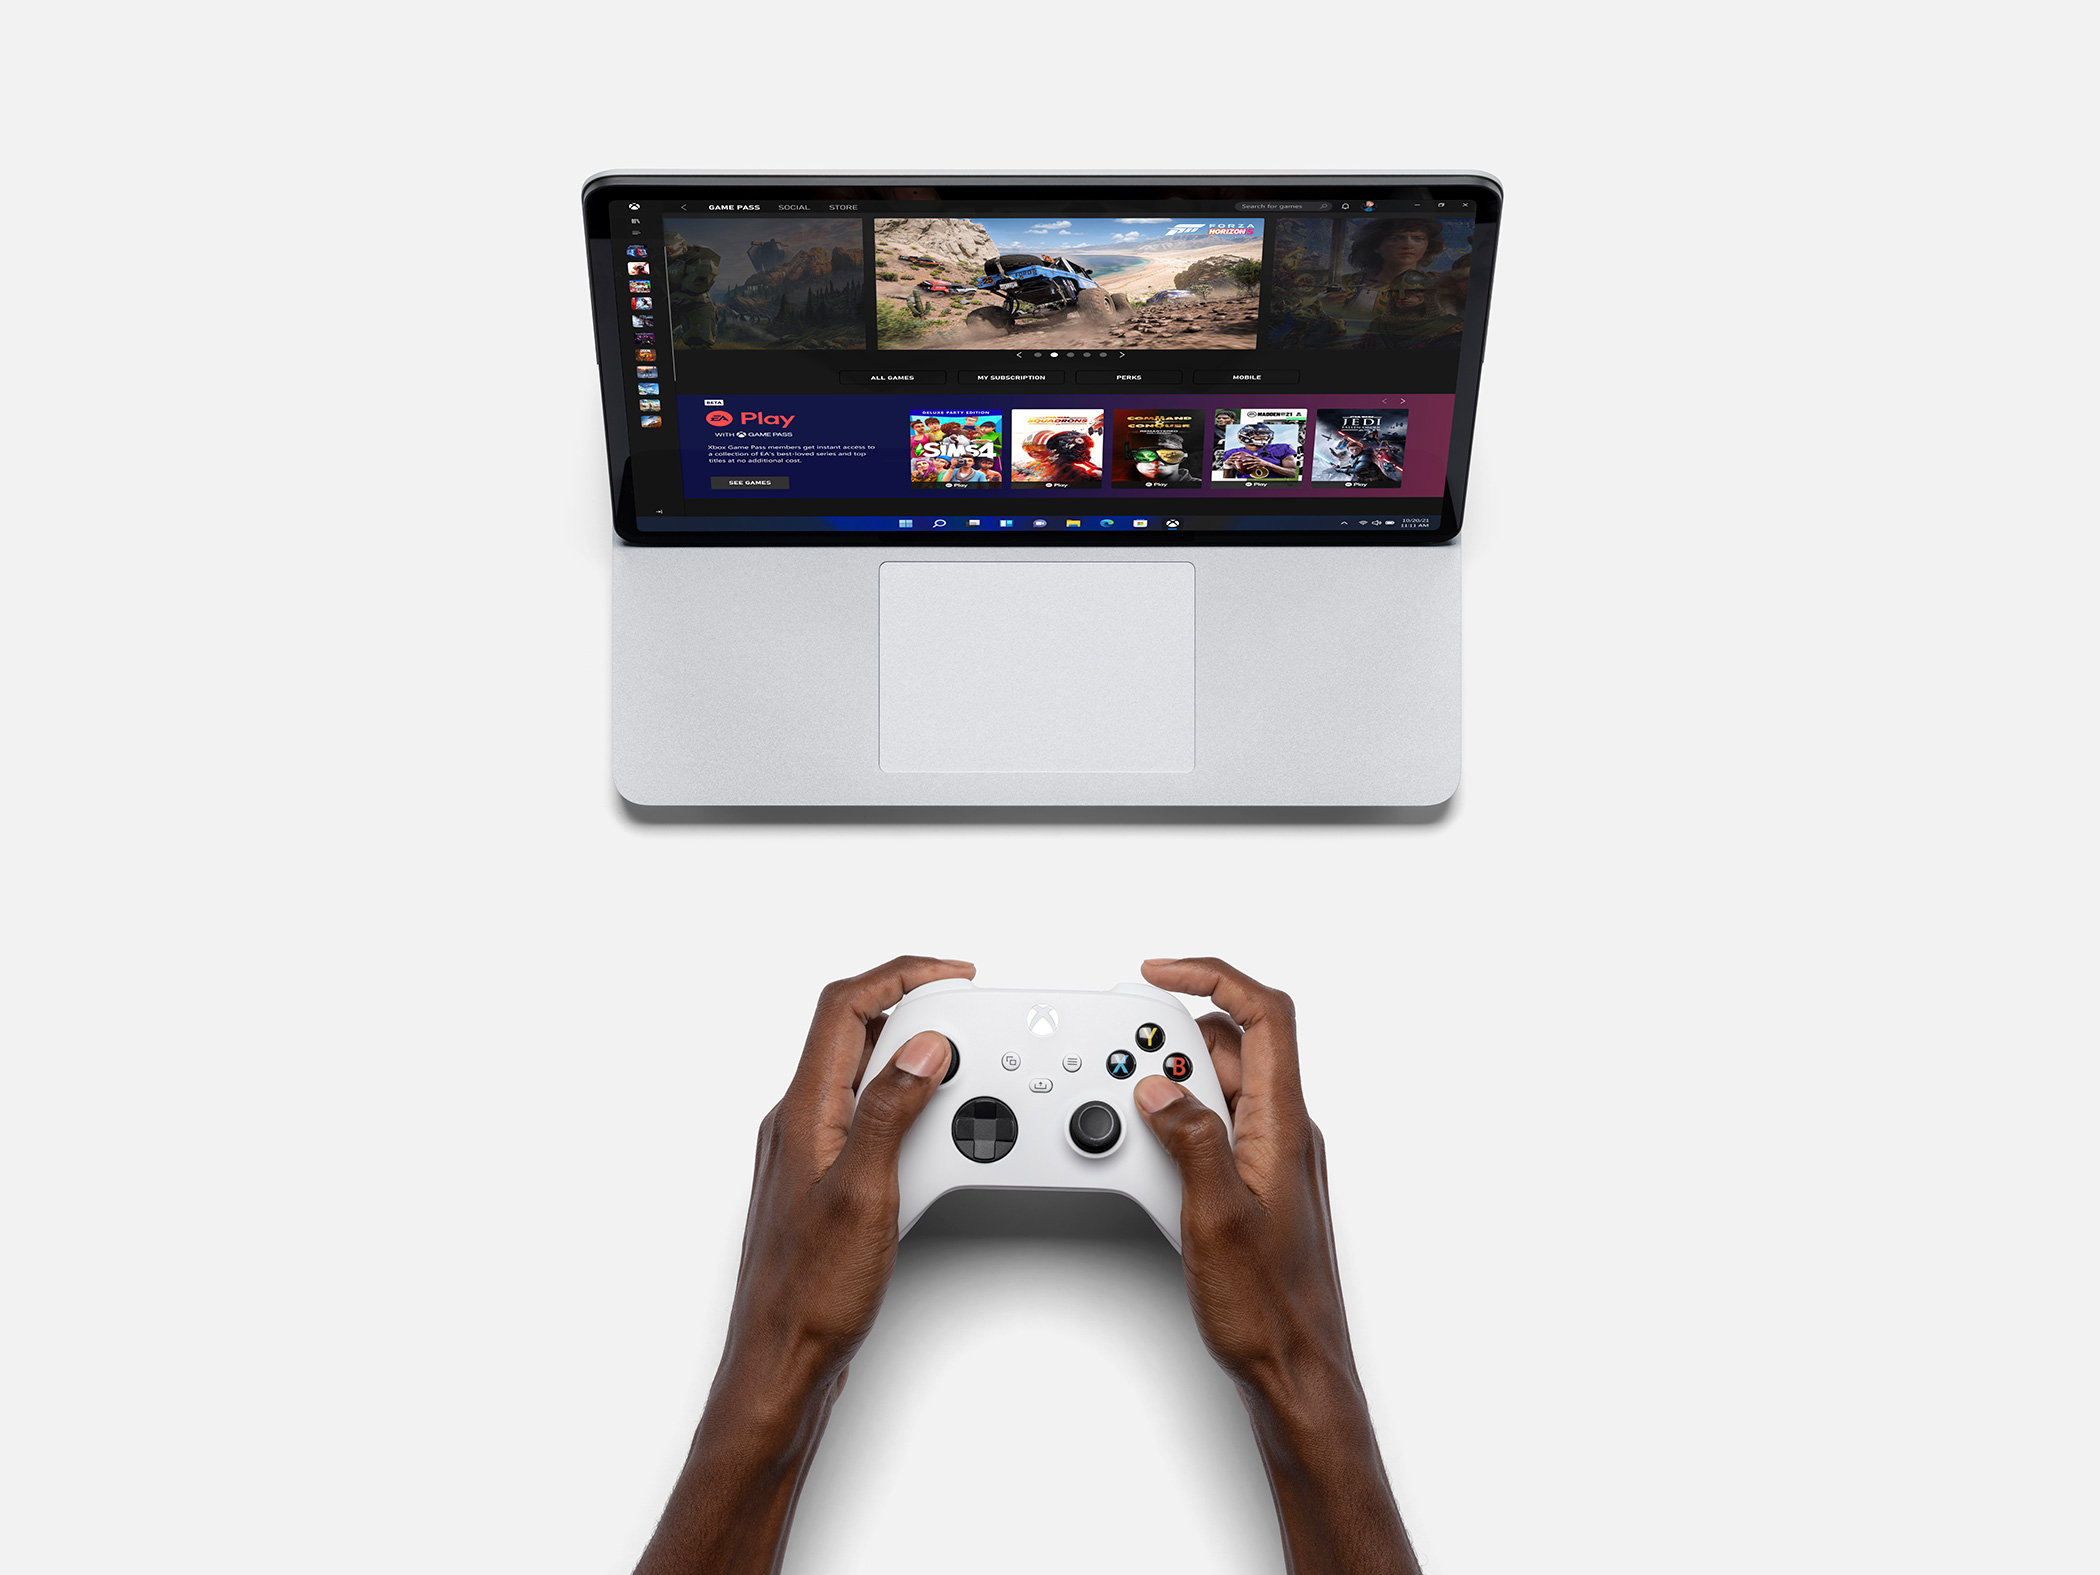 Microsoft Surface Laptop Studio with the Xbox app open with someone playing an X-Box controller in front of it